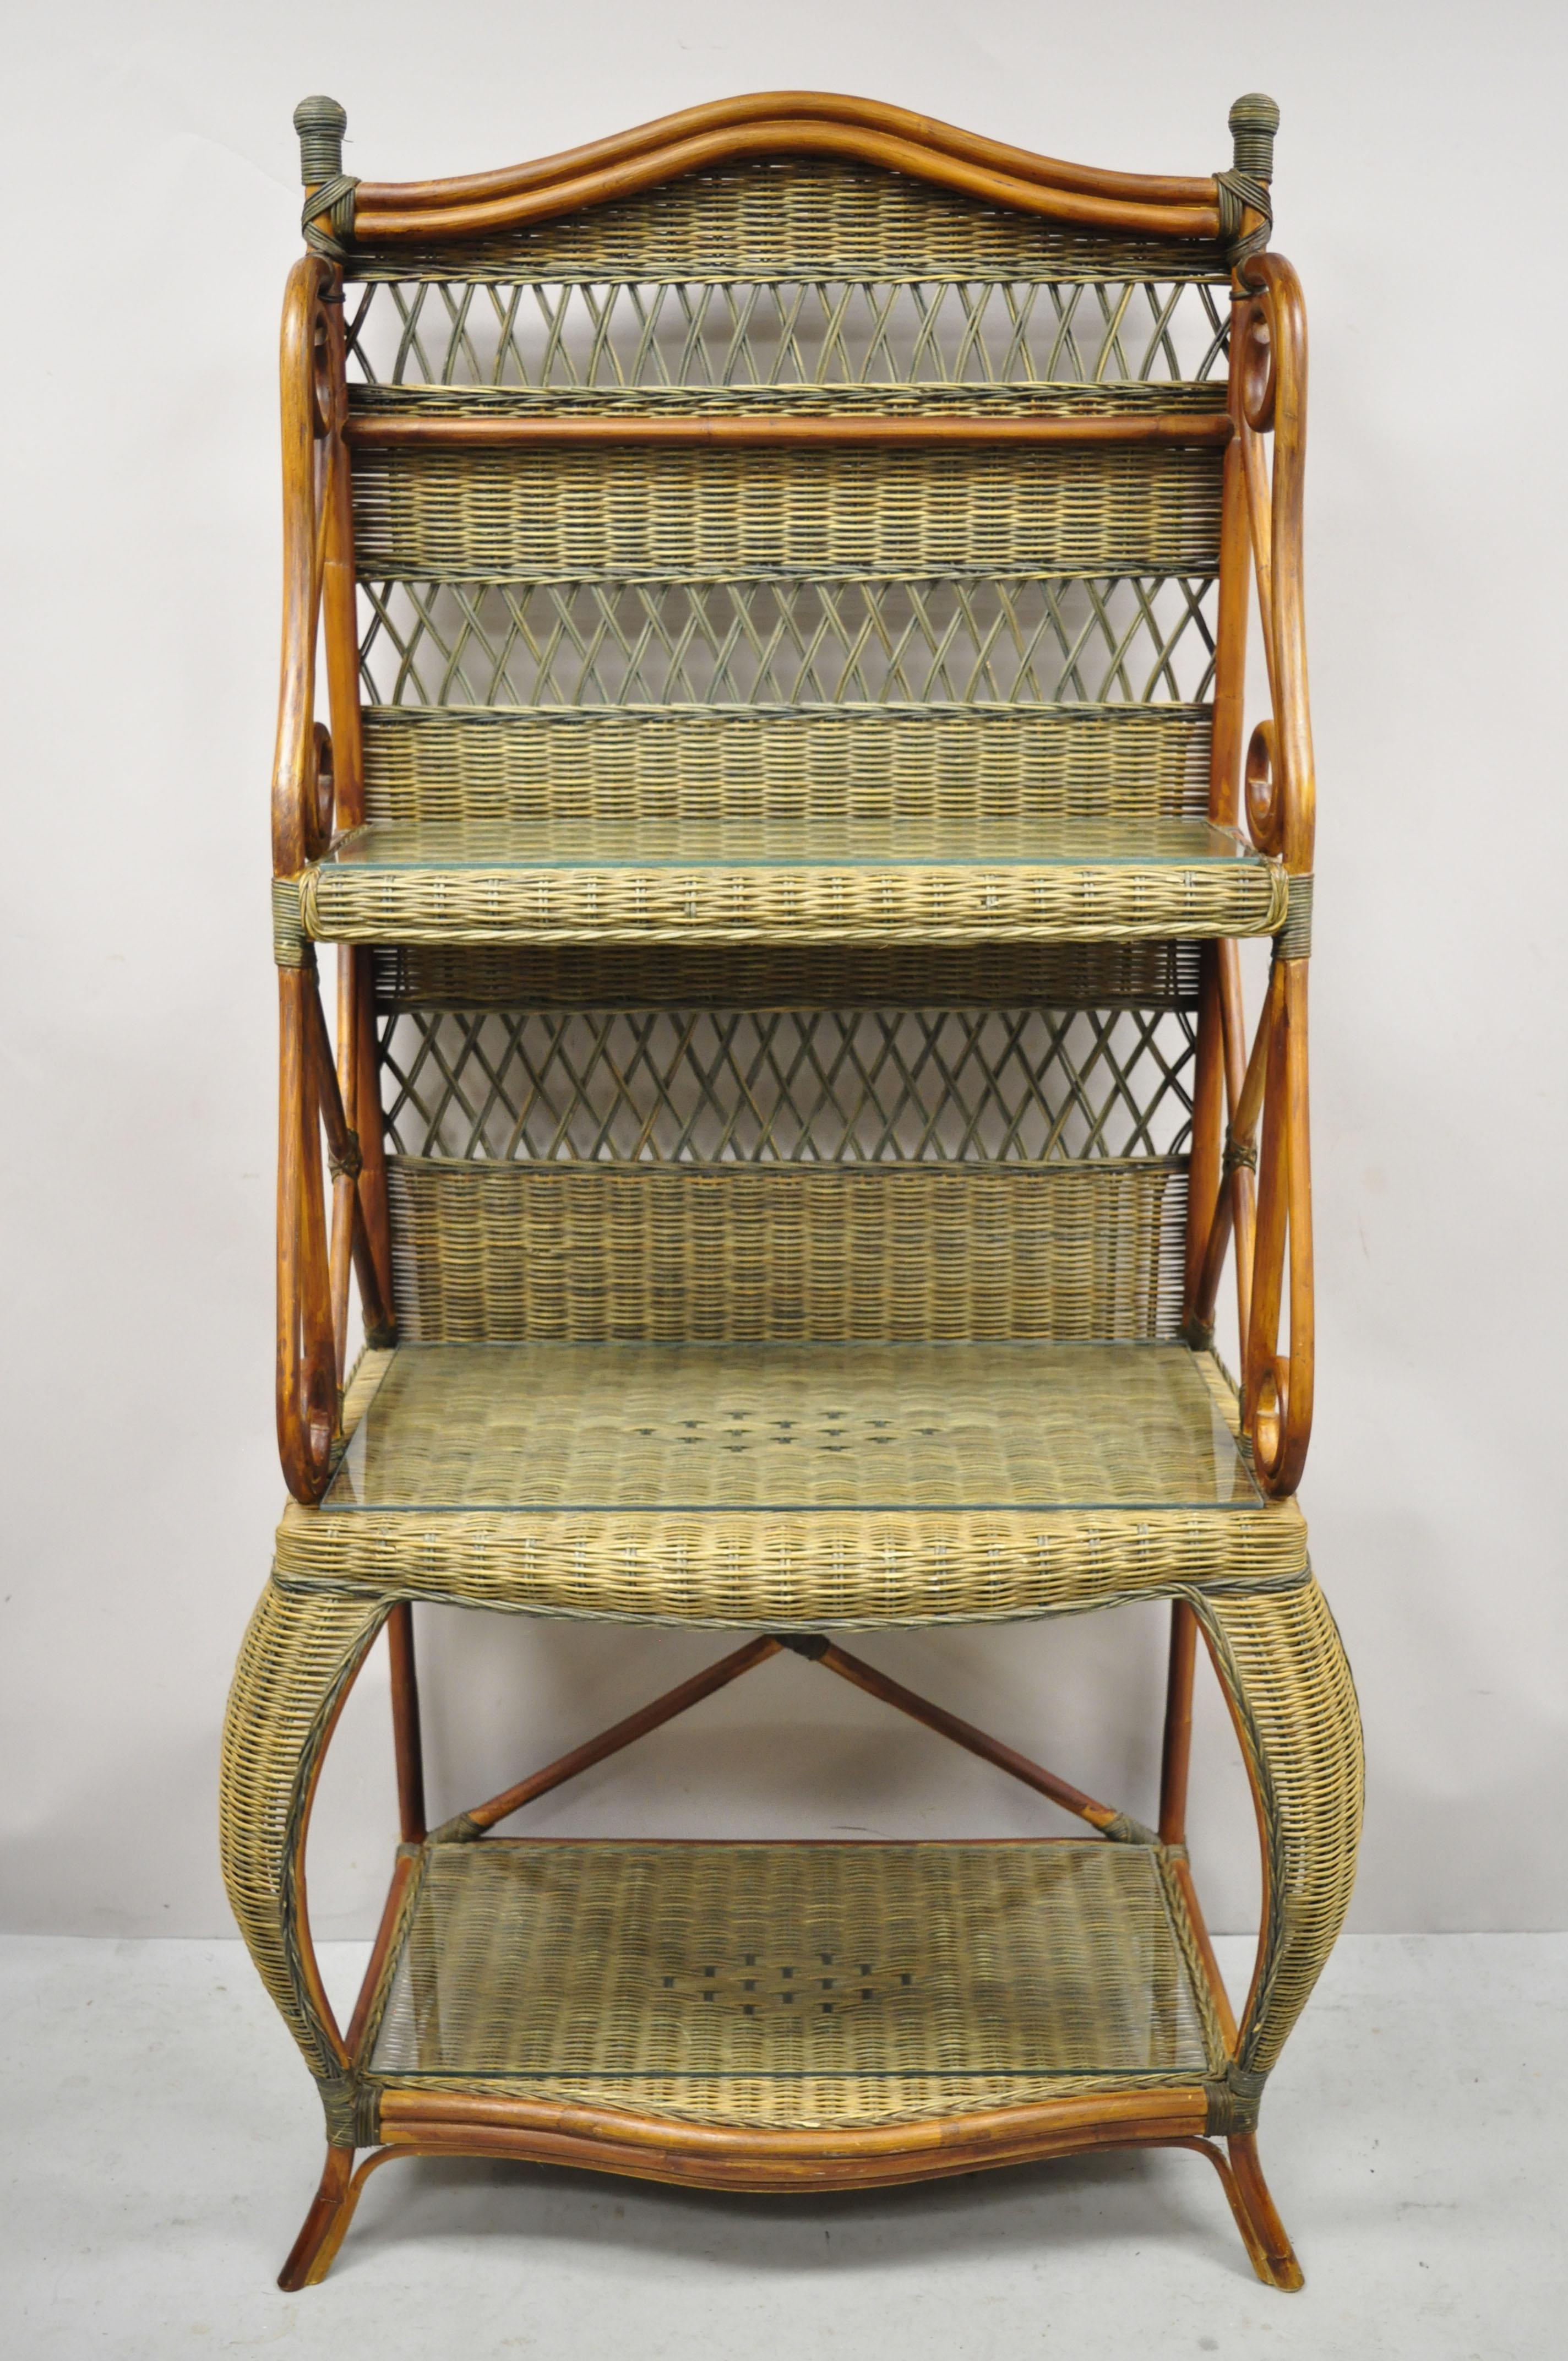 French Country 3 Tier Wicker Rattan Wrapped Frame Kitchen Bakers Rack Stand 4